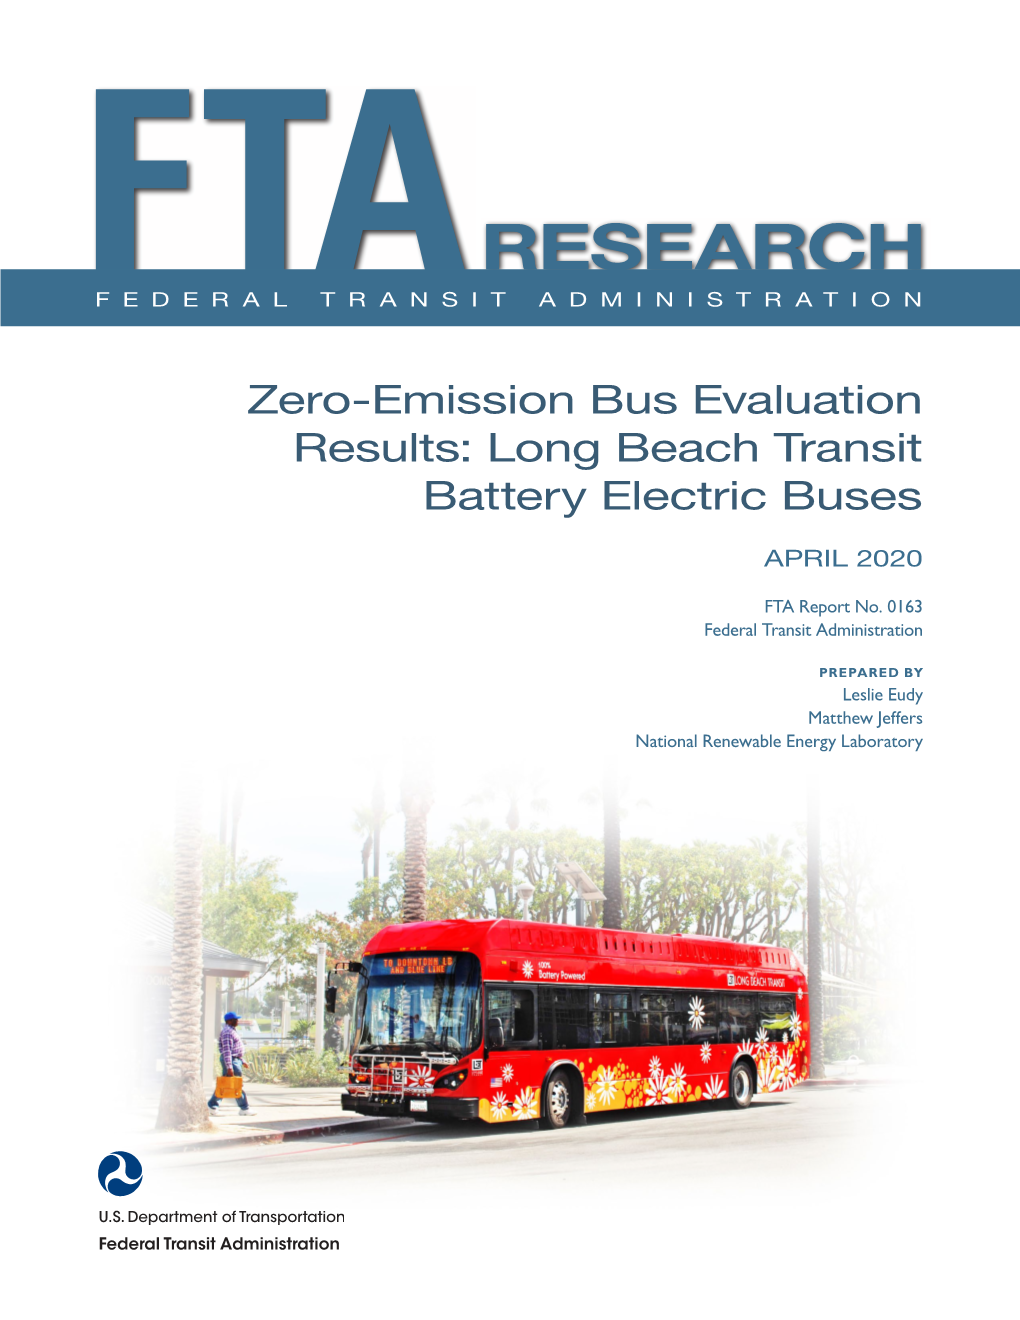 Zero-Emission Bus Evaluation Results: Long Beach Transit Battery Electric Buses